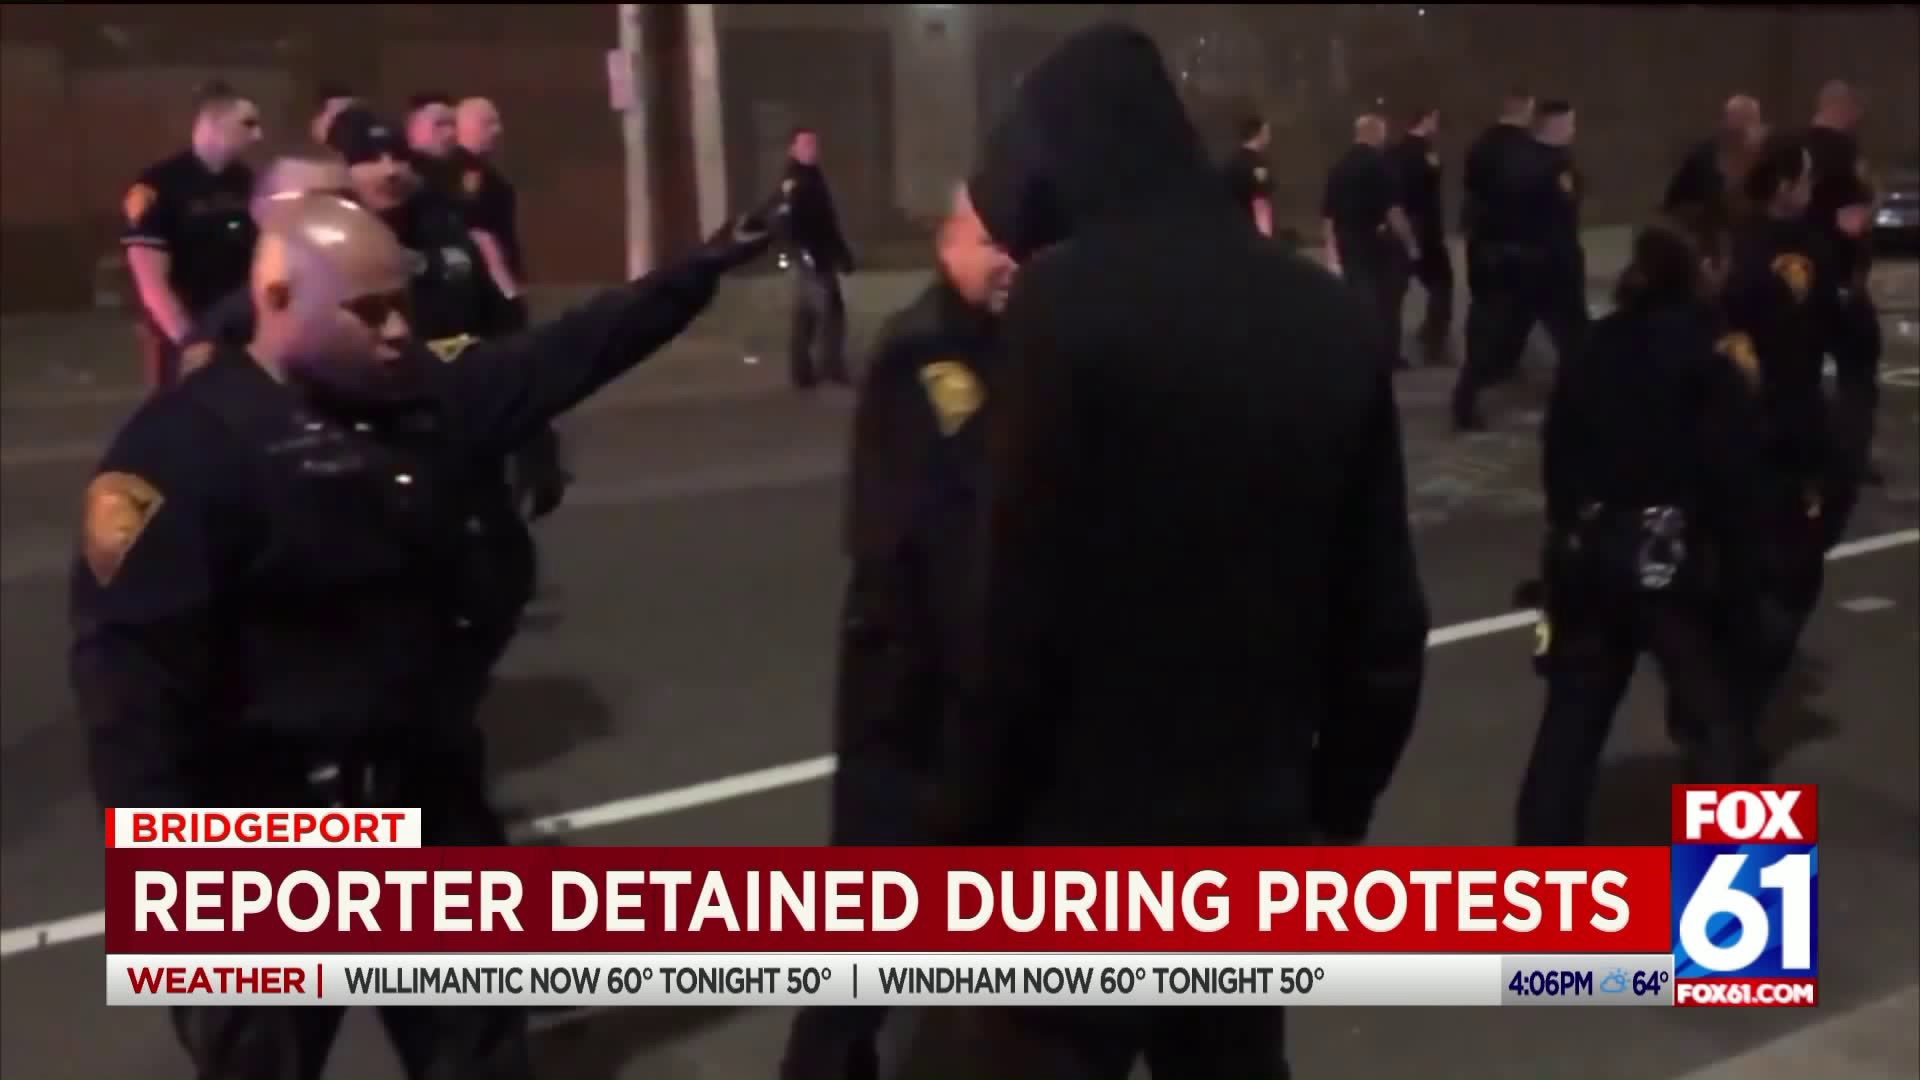 Reporter detained during confrontation